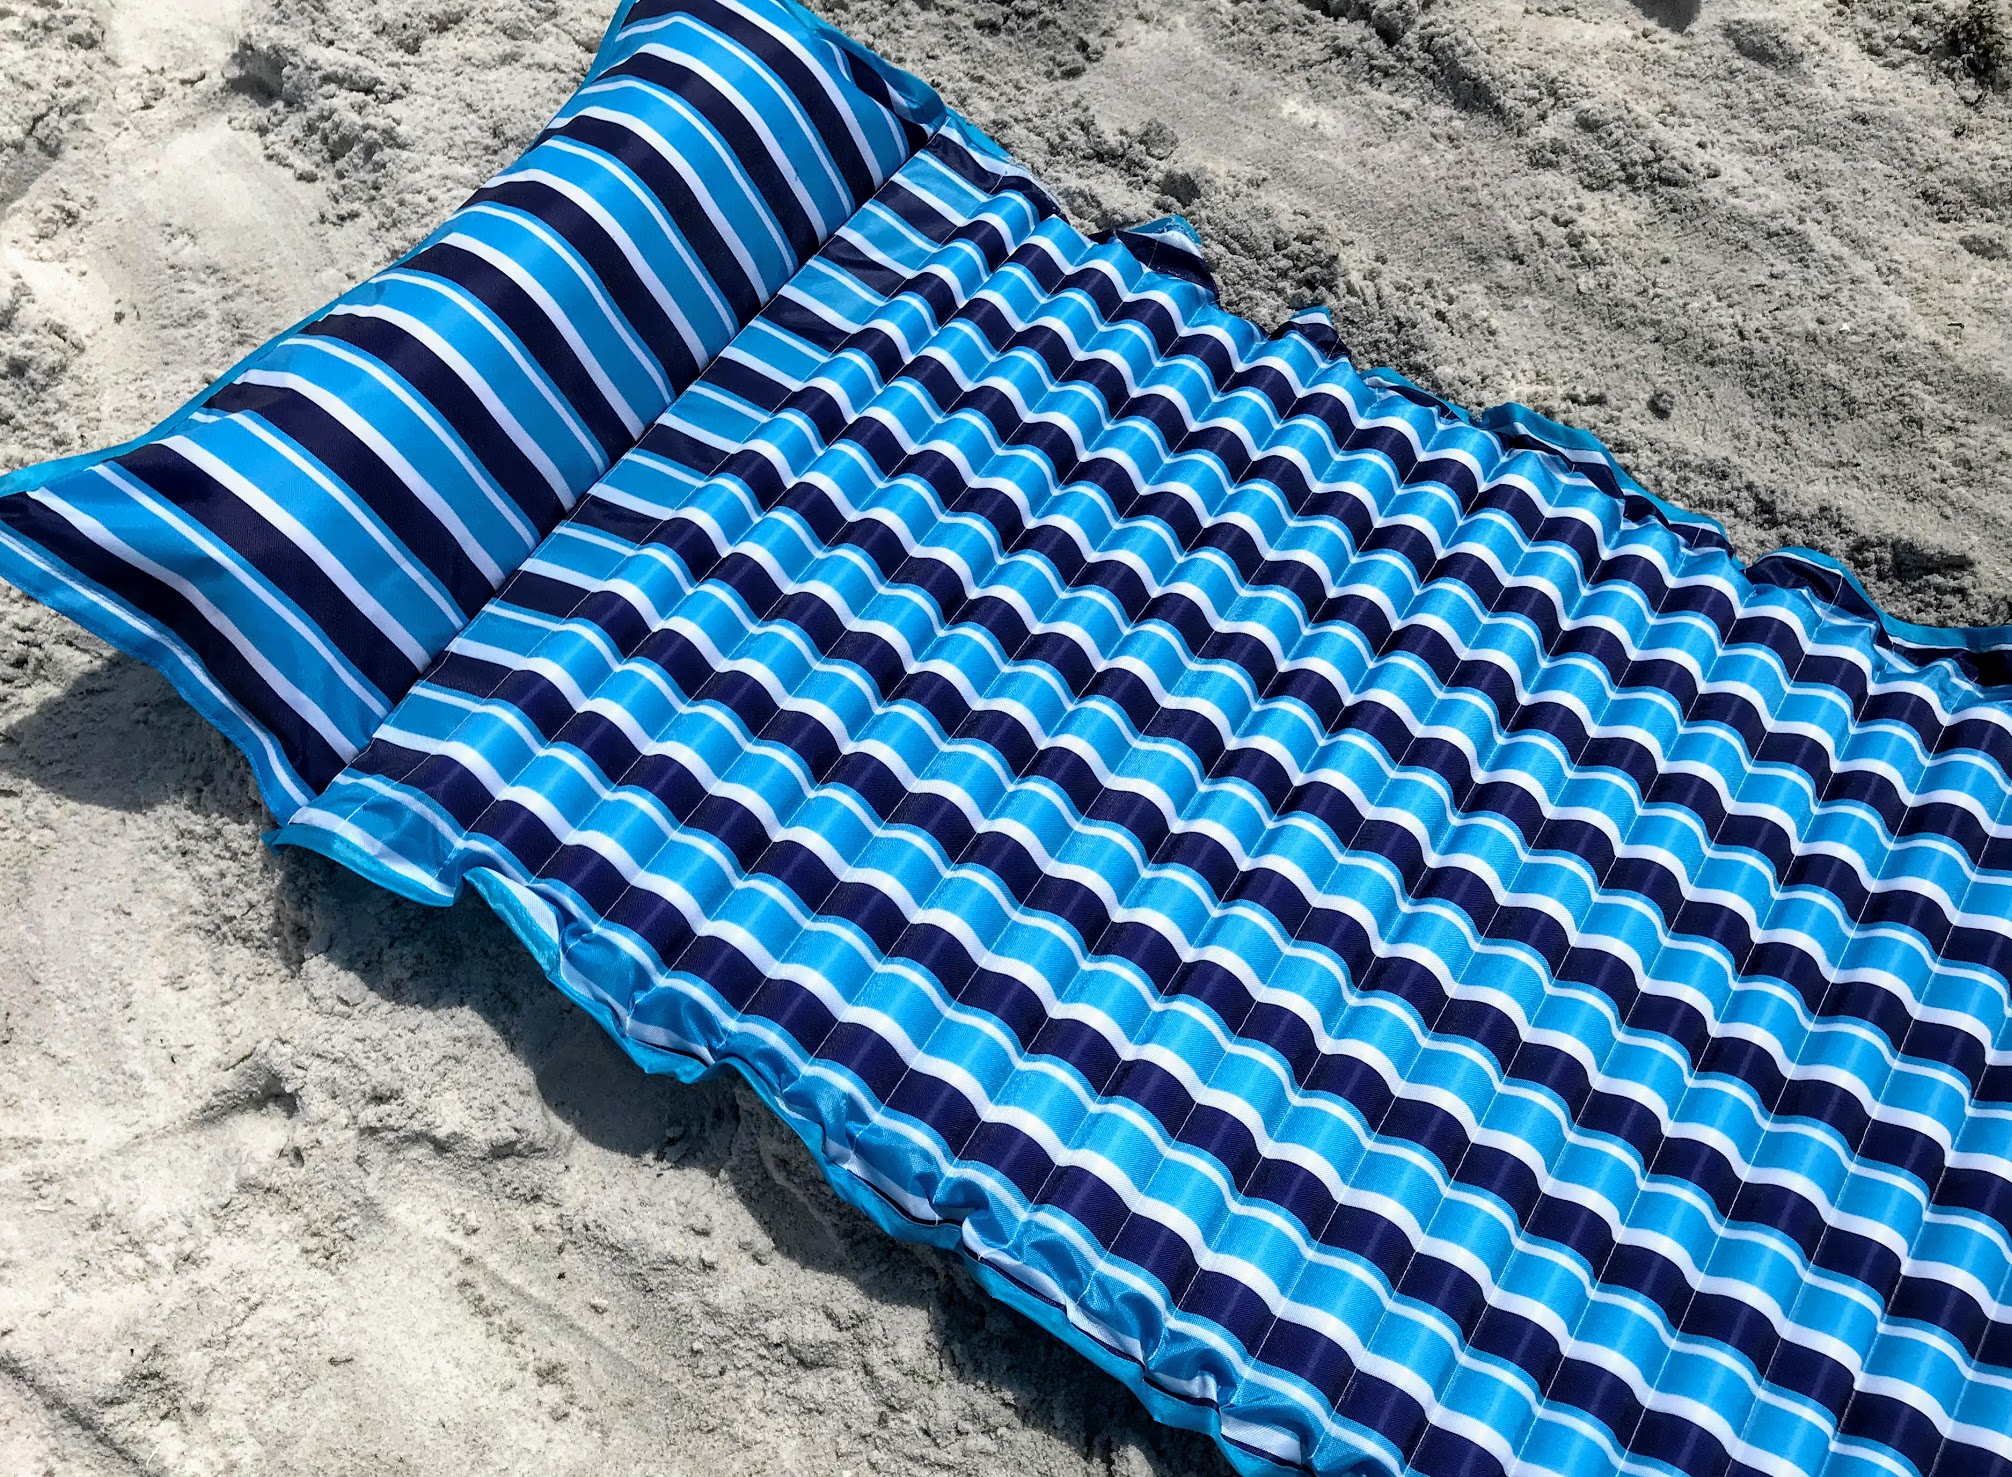 beach mat with inflatable pillow